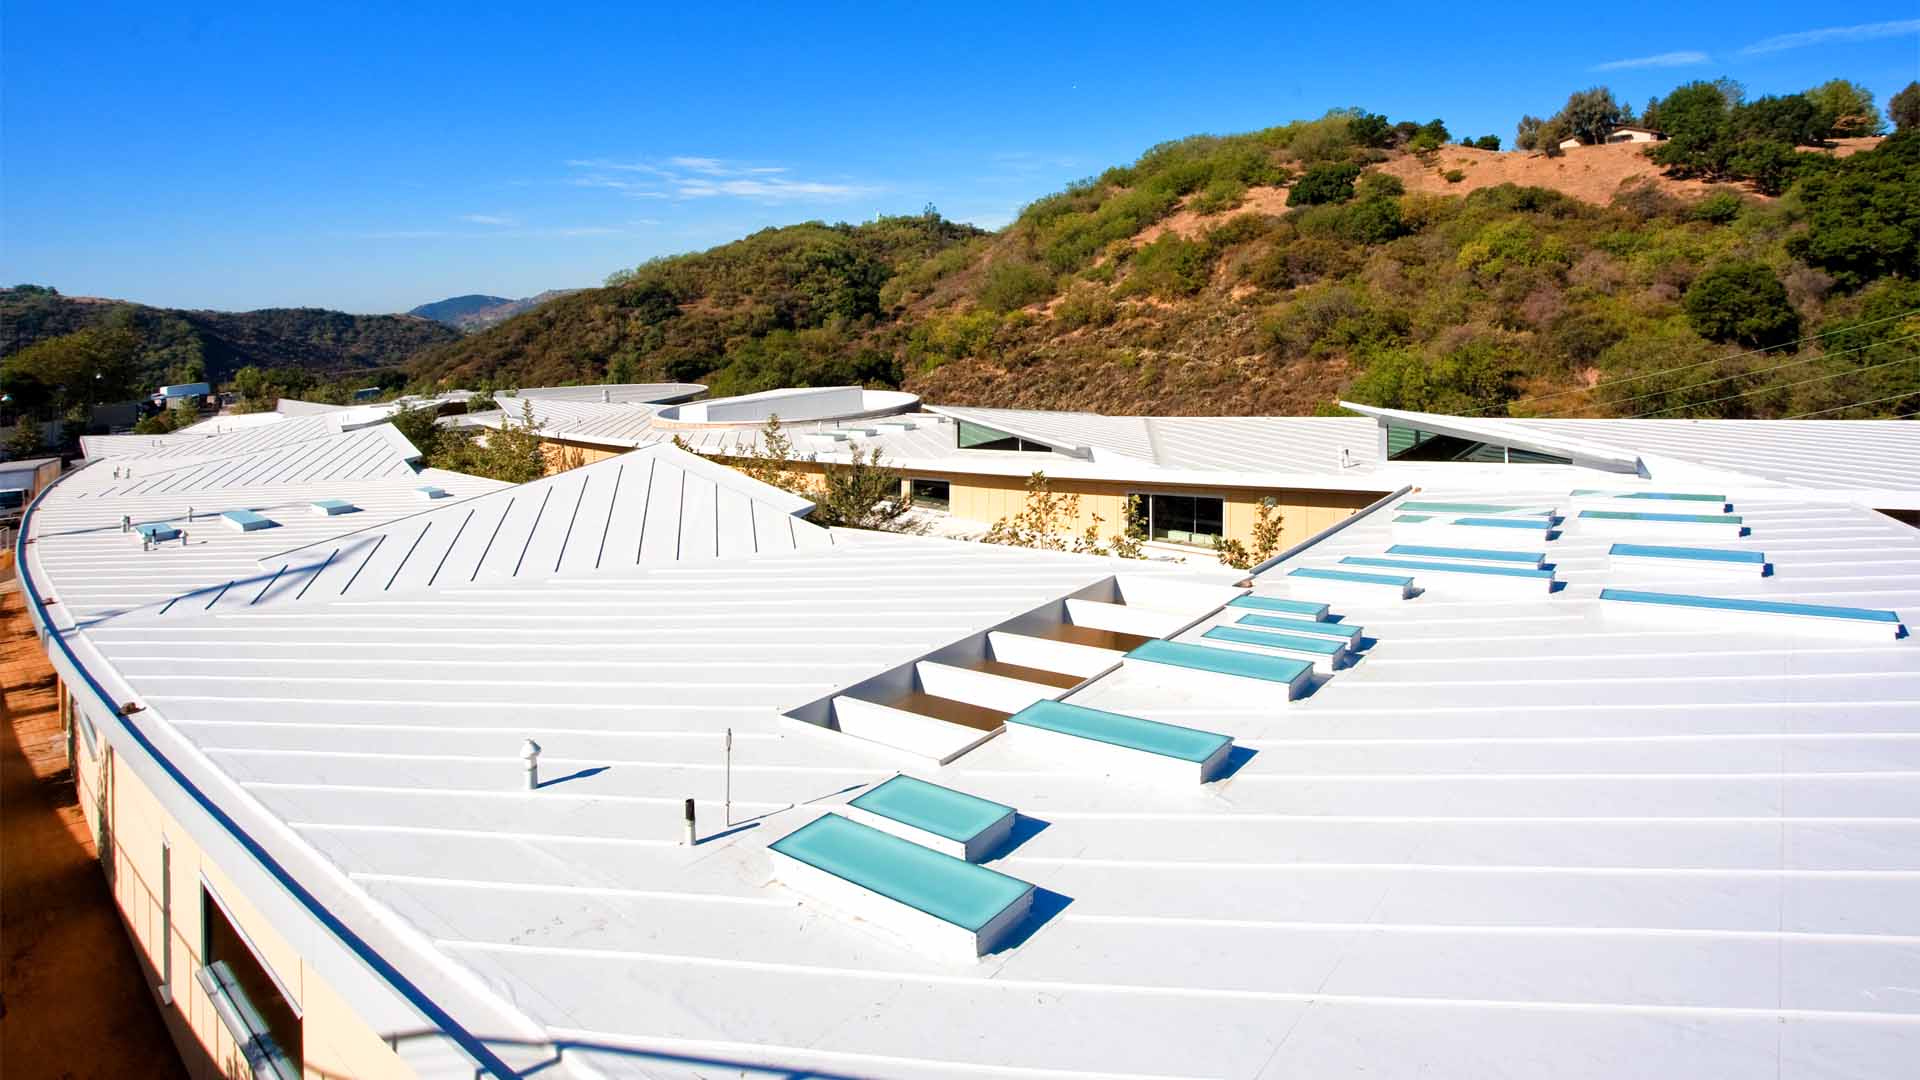 Los Angeles Commercial Roofing Stone Roofing